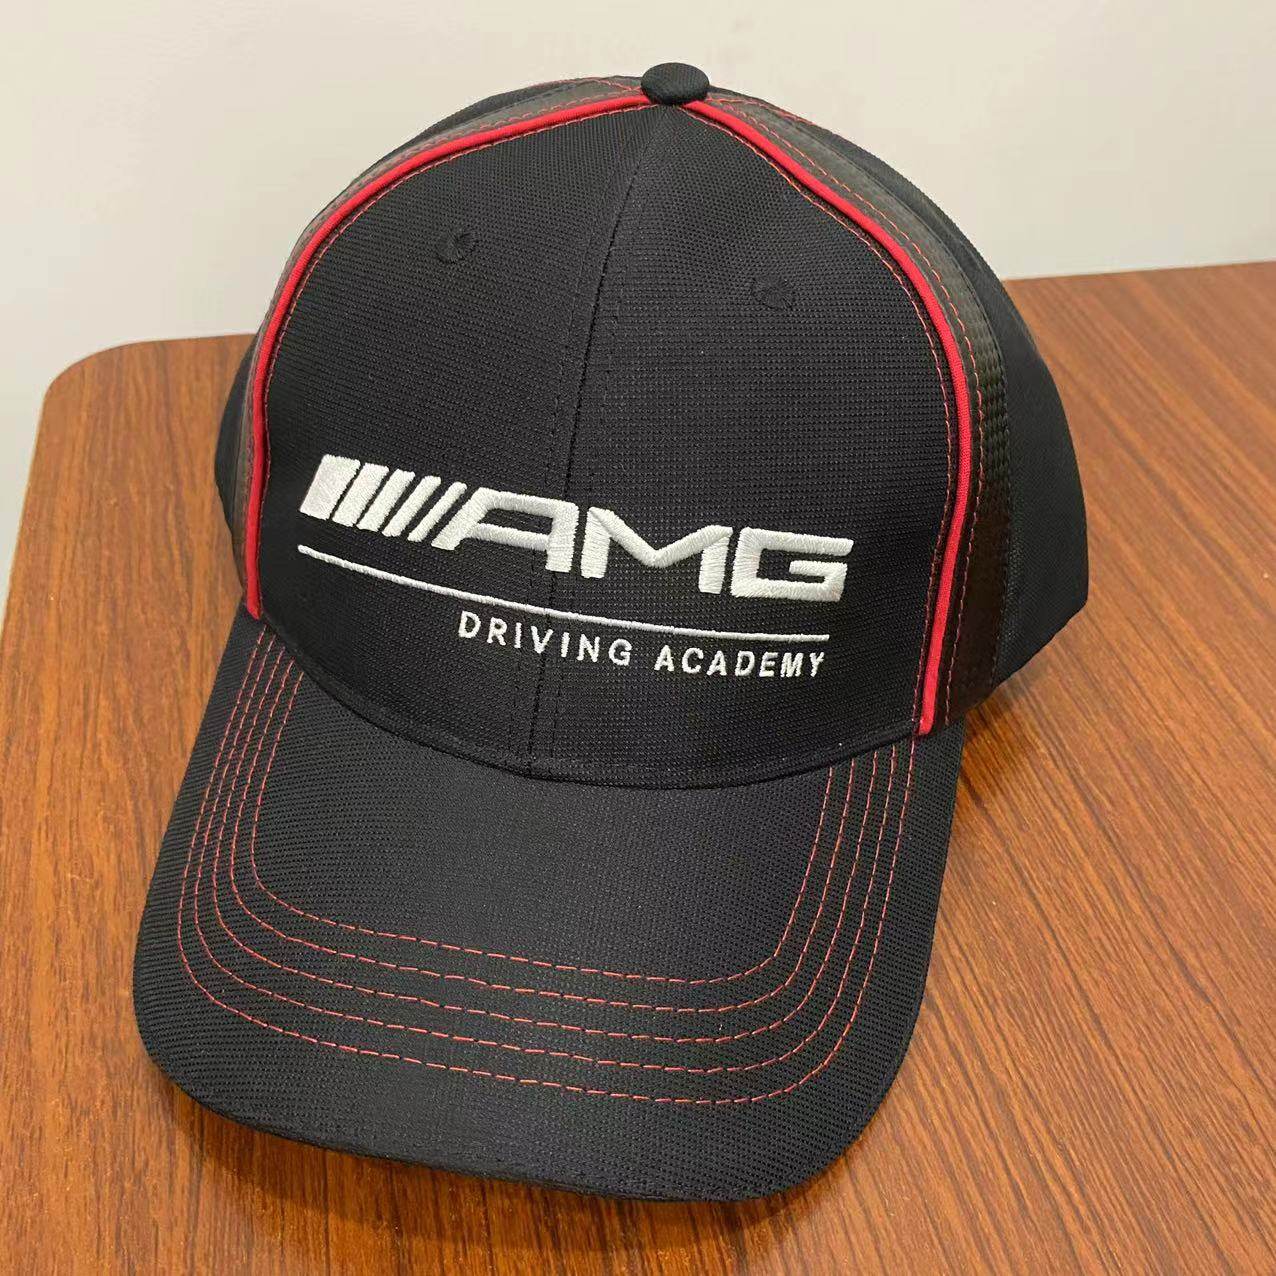 AMG Driving Academy Black Lining Hat 40% cotton